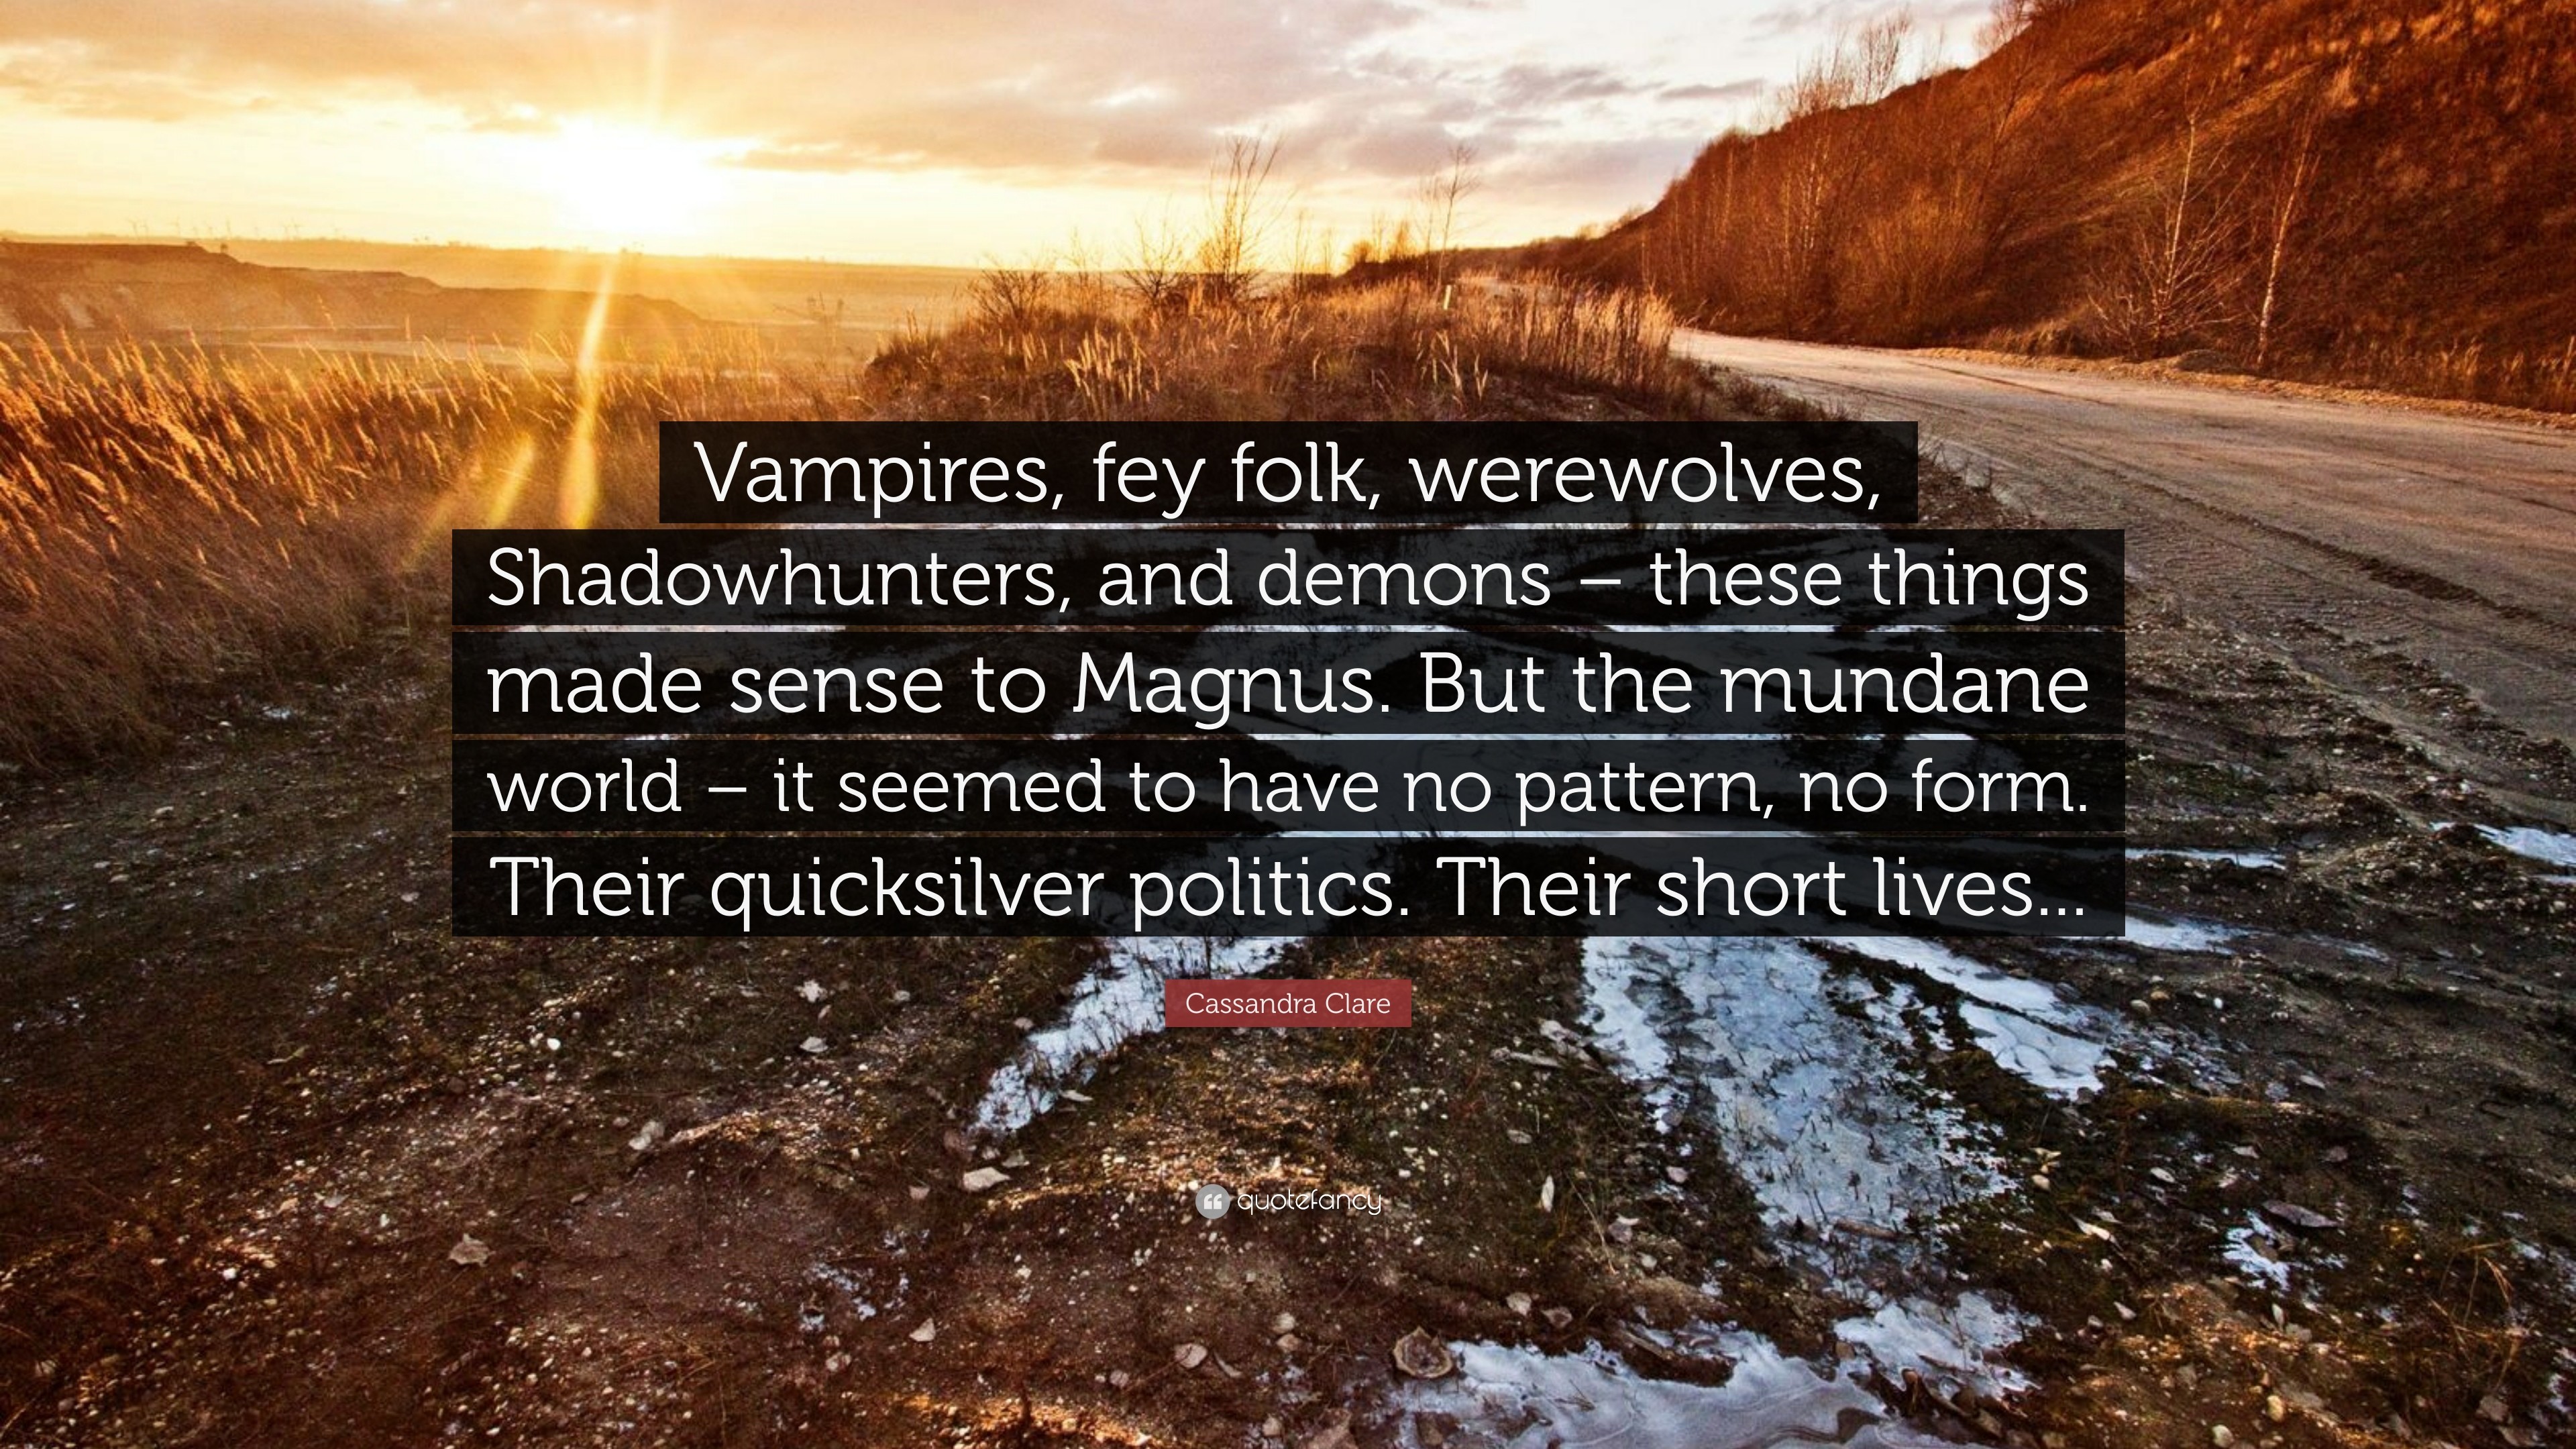 3840x2160 Cassandra Clare Quote: “Vampires, fey folk, werewolves, Shadowhunters, and  demons